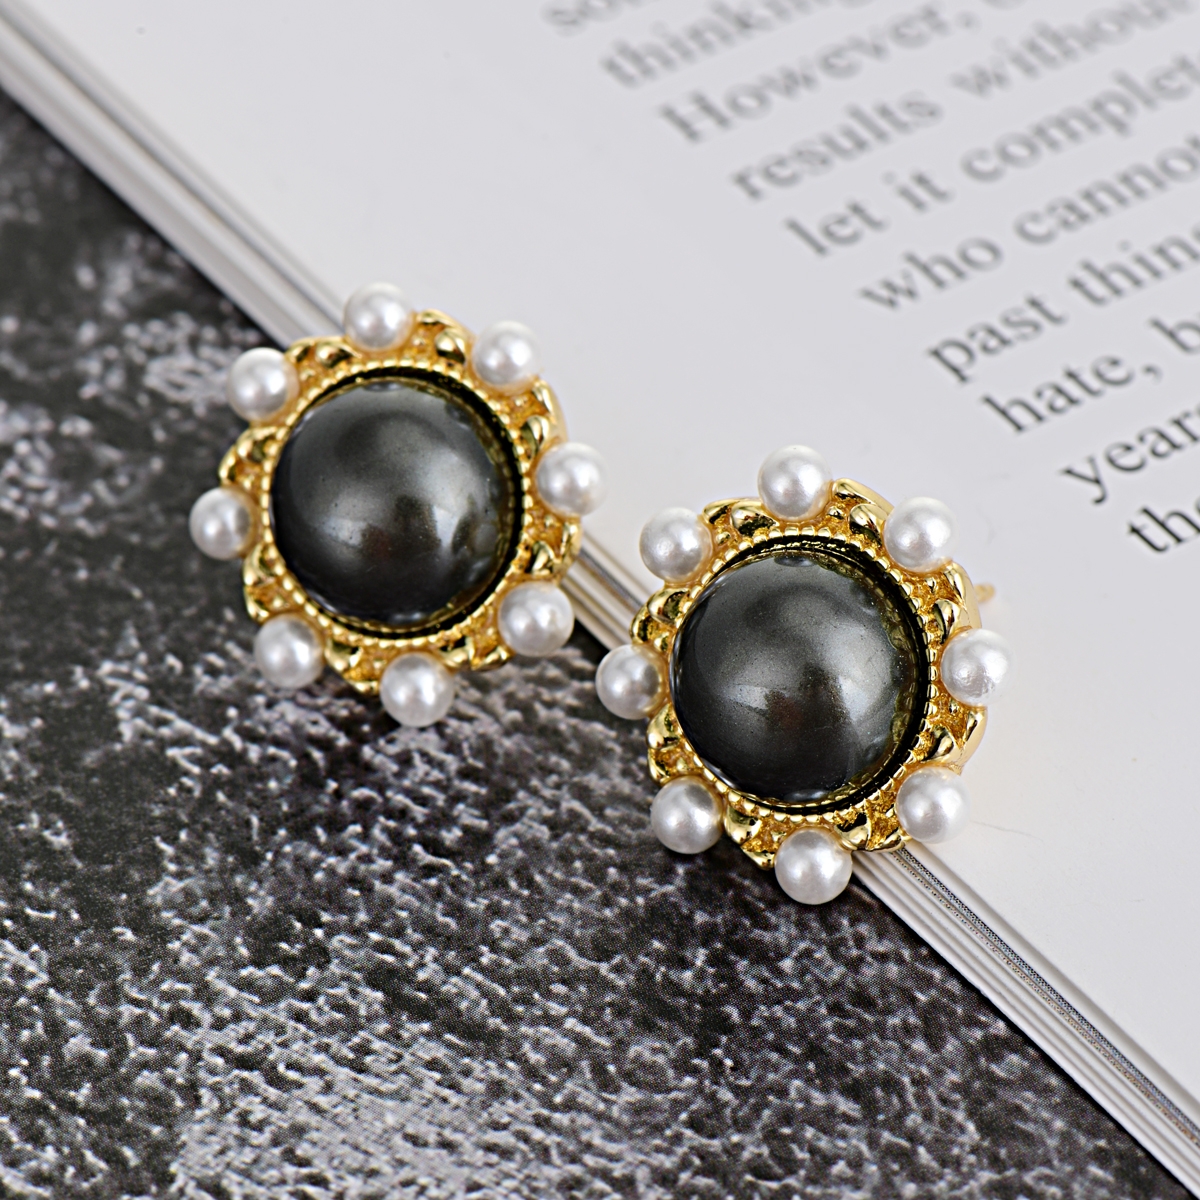 Wholesale Gold Plated Black Stud Earrings at Great Low Price